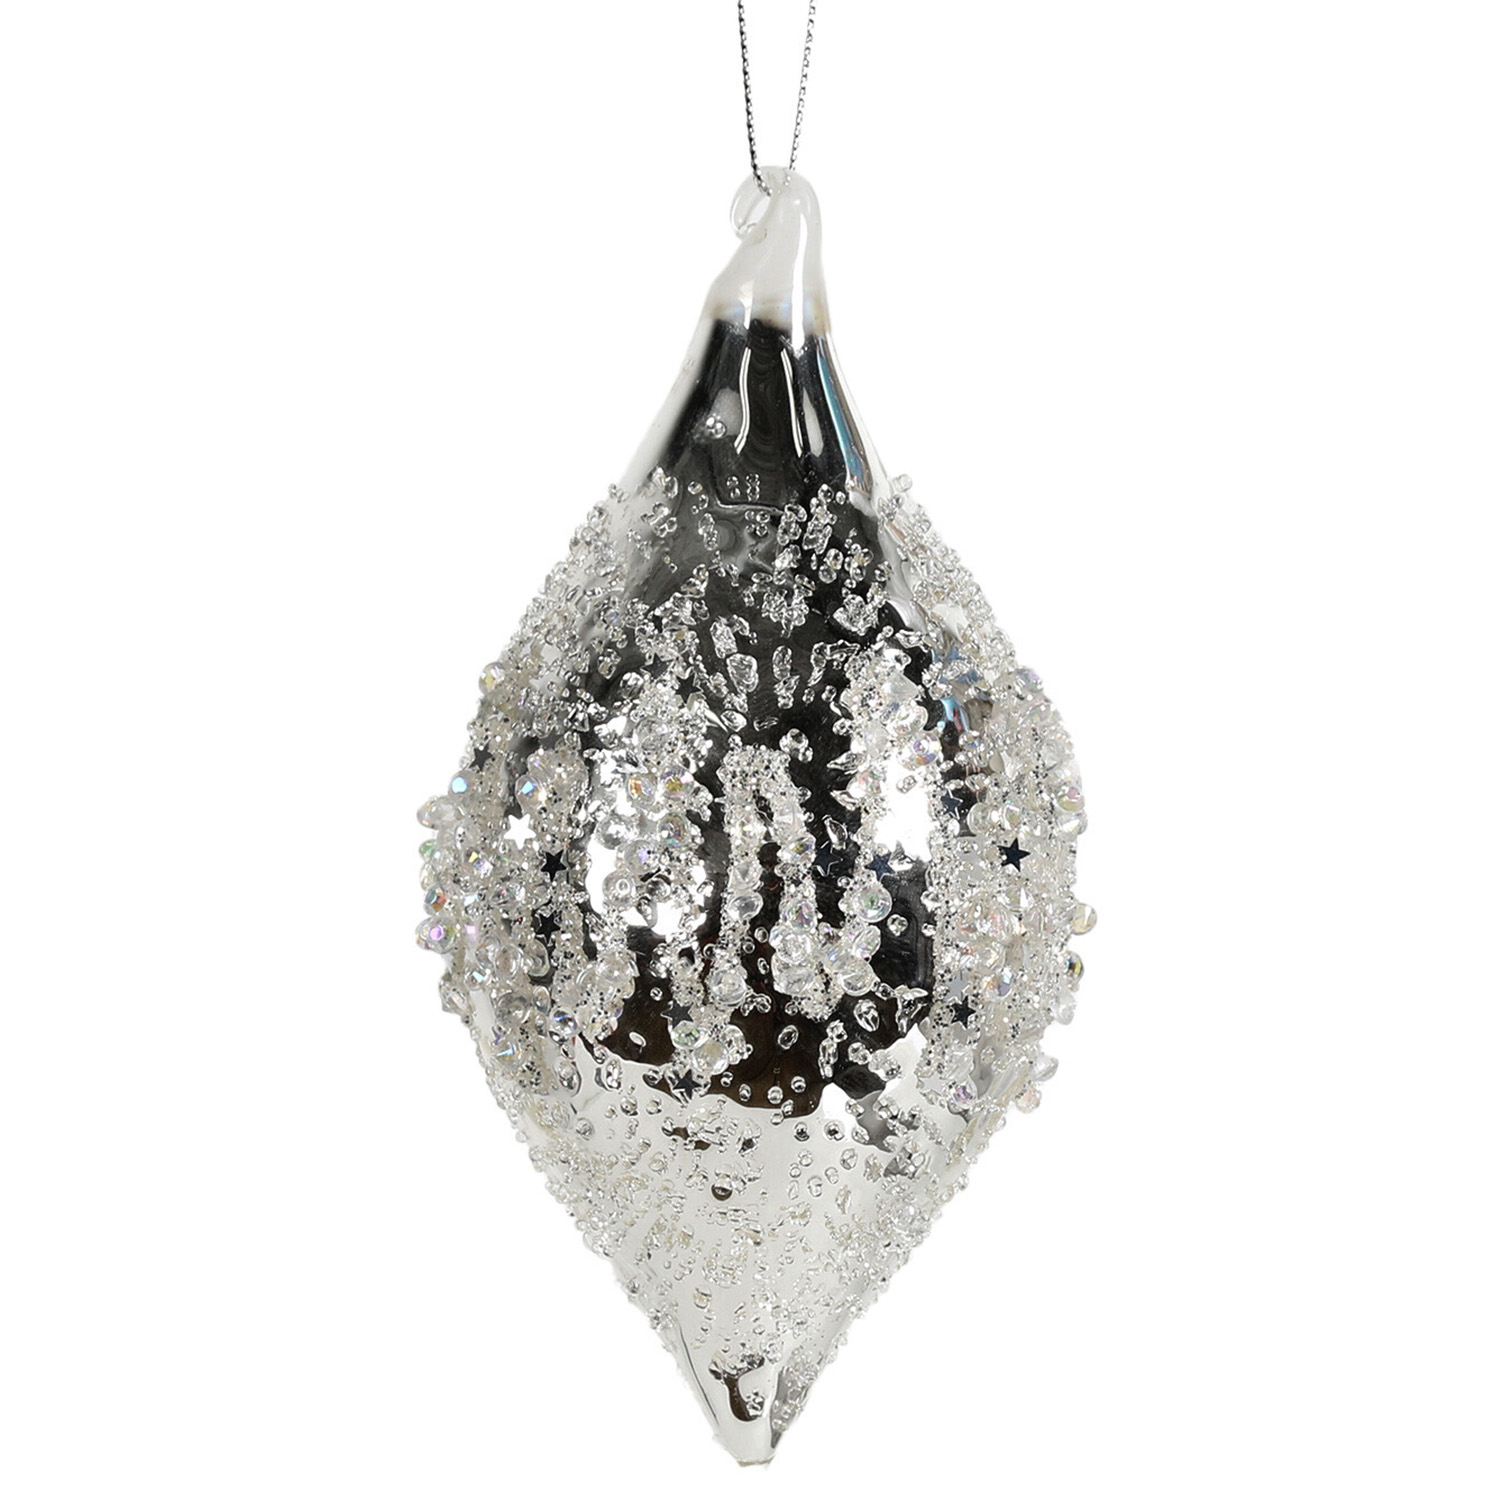 Chic Noir Shiny Silver Beaded Droplet Ornament Image